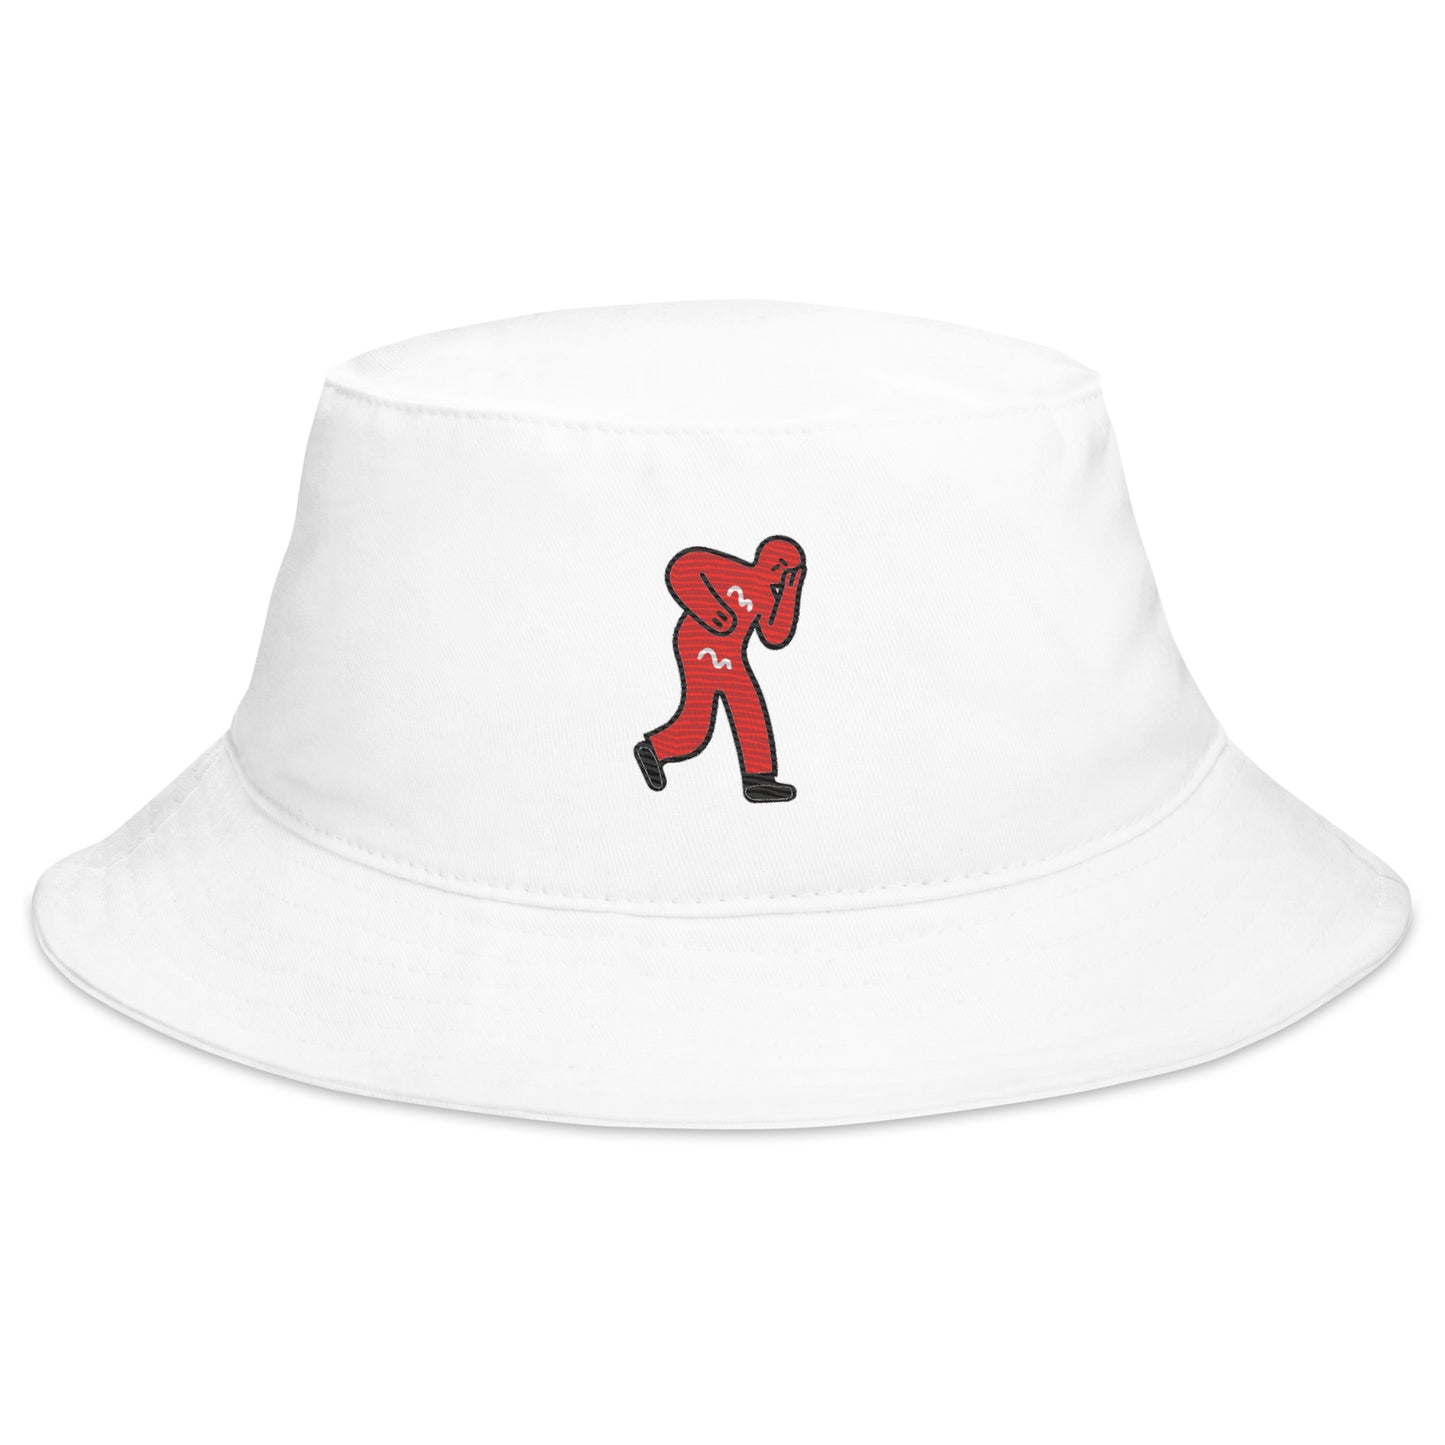 Doodles Me "Most Wanted" Bucket Hat #8